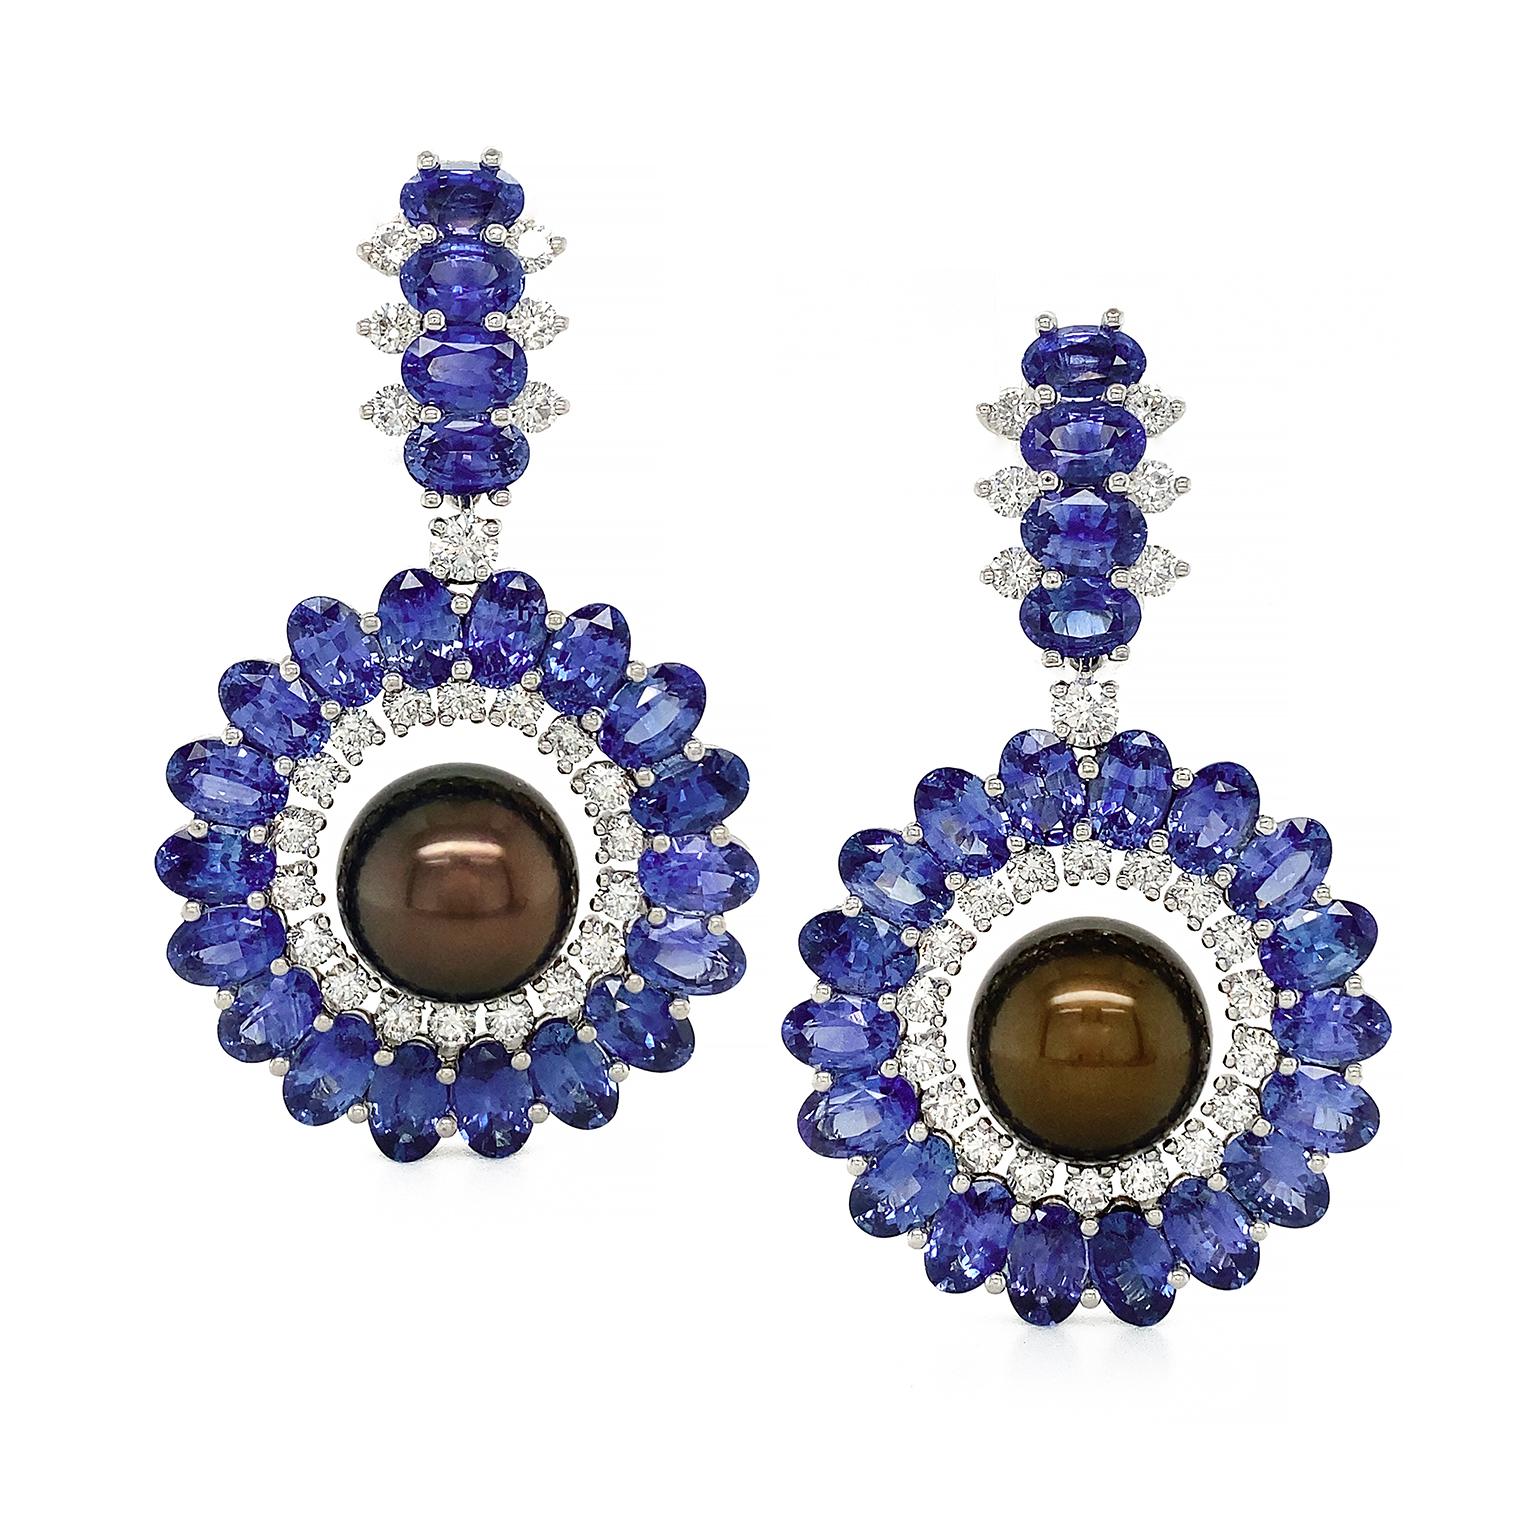 Vibrant indigo and navy shades of sapphires sparkle in these earrings. The design begins with a single row of four oval sapphires, which feature brilliant cut diamonds on the sides. A single diamond leads to a climax of sapphires arranged in a